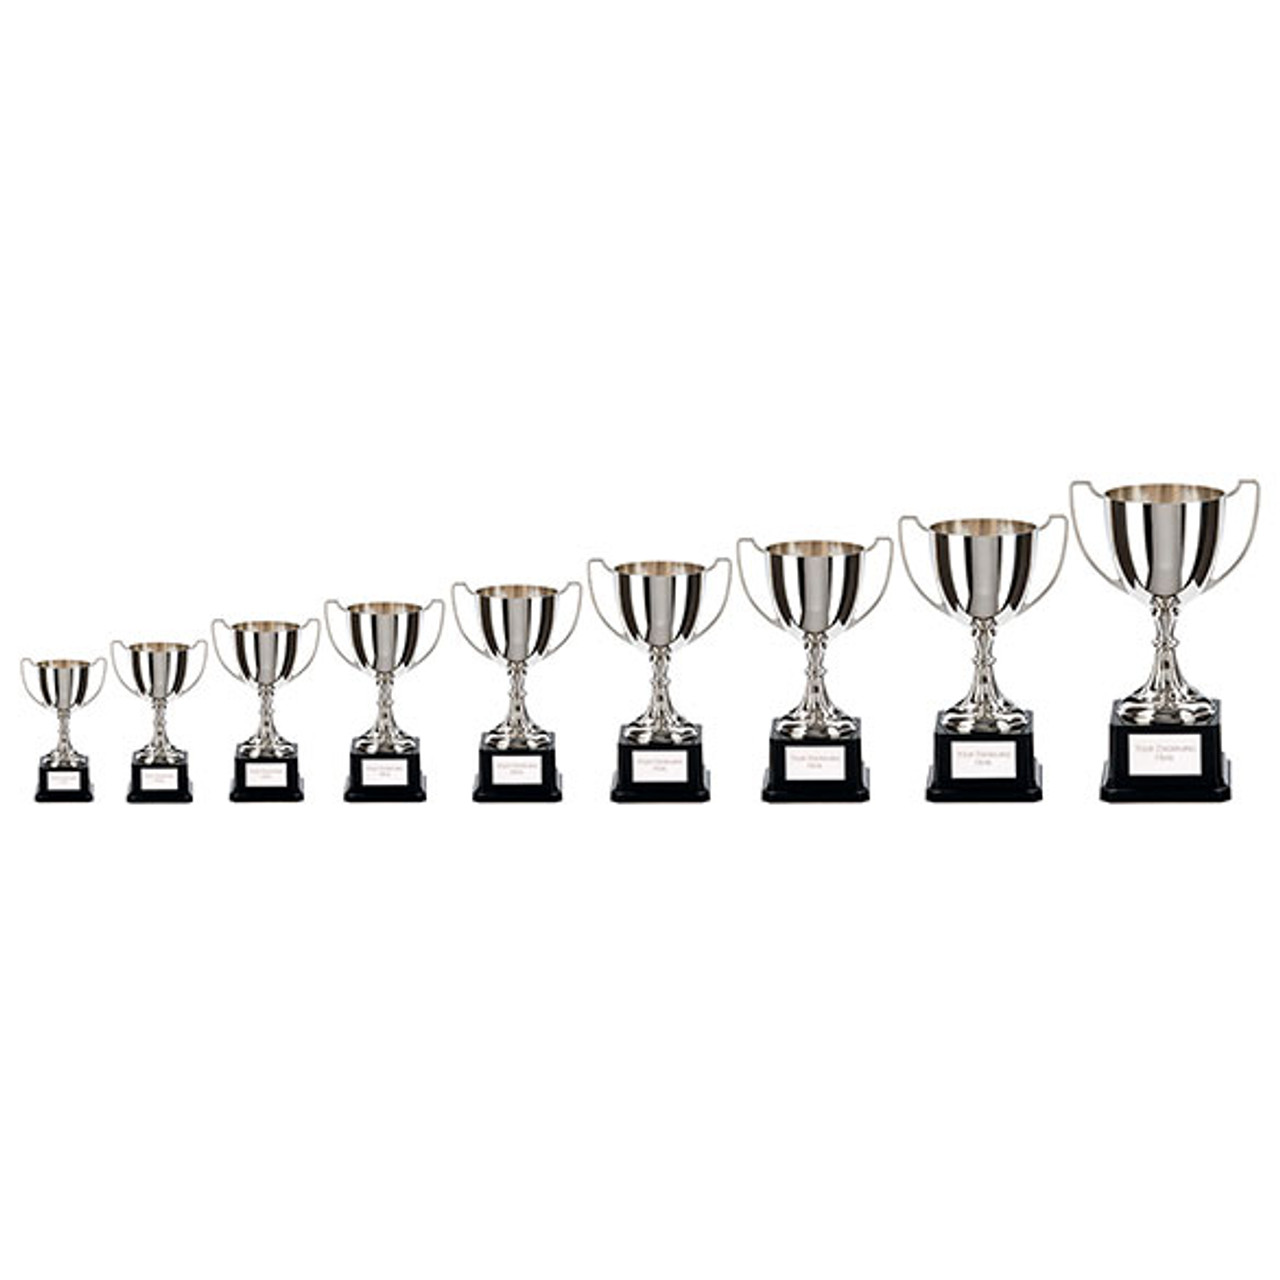 LEGEND Nickel Plated Cup Trophy Collection